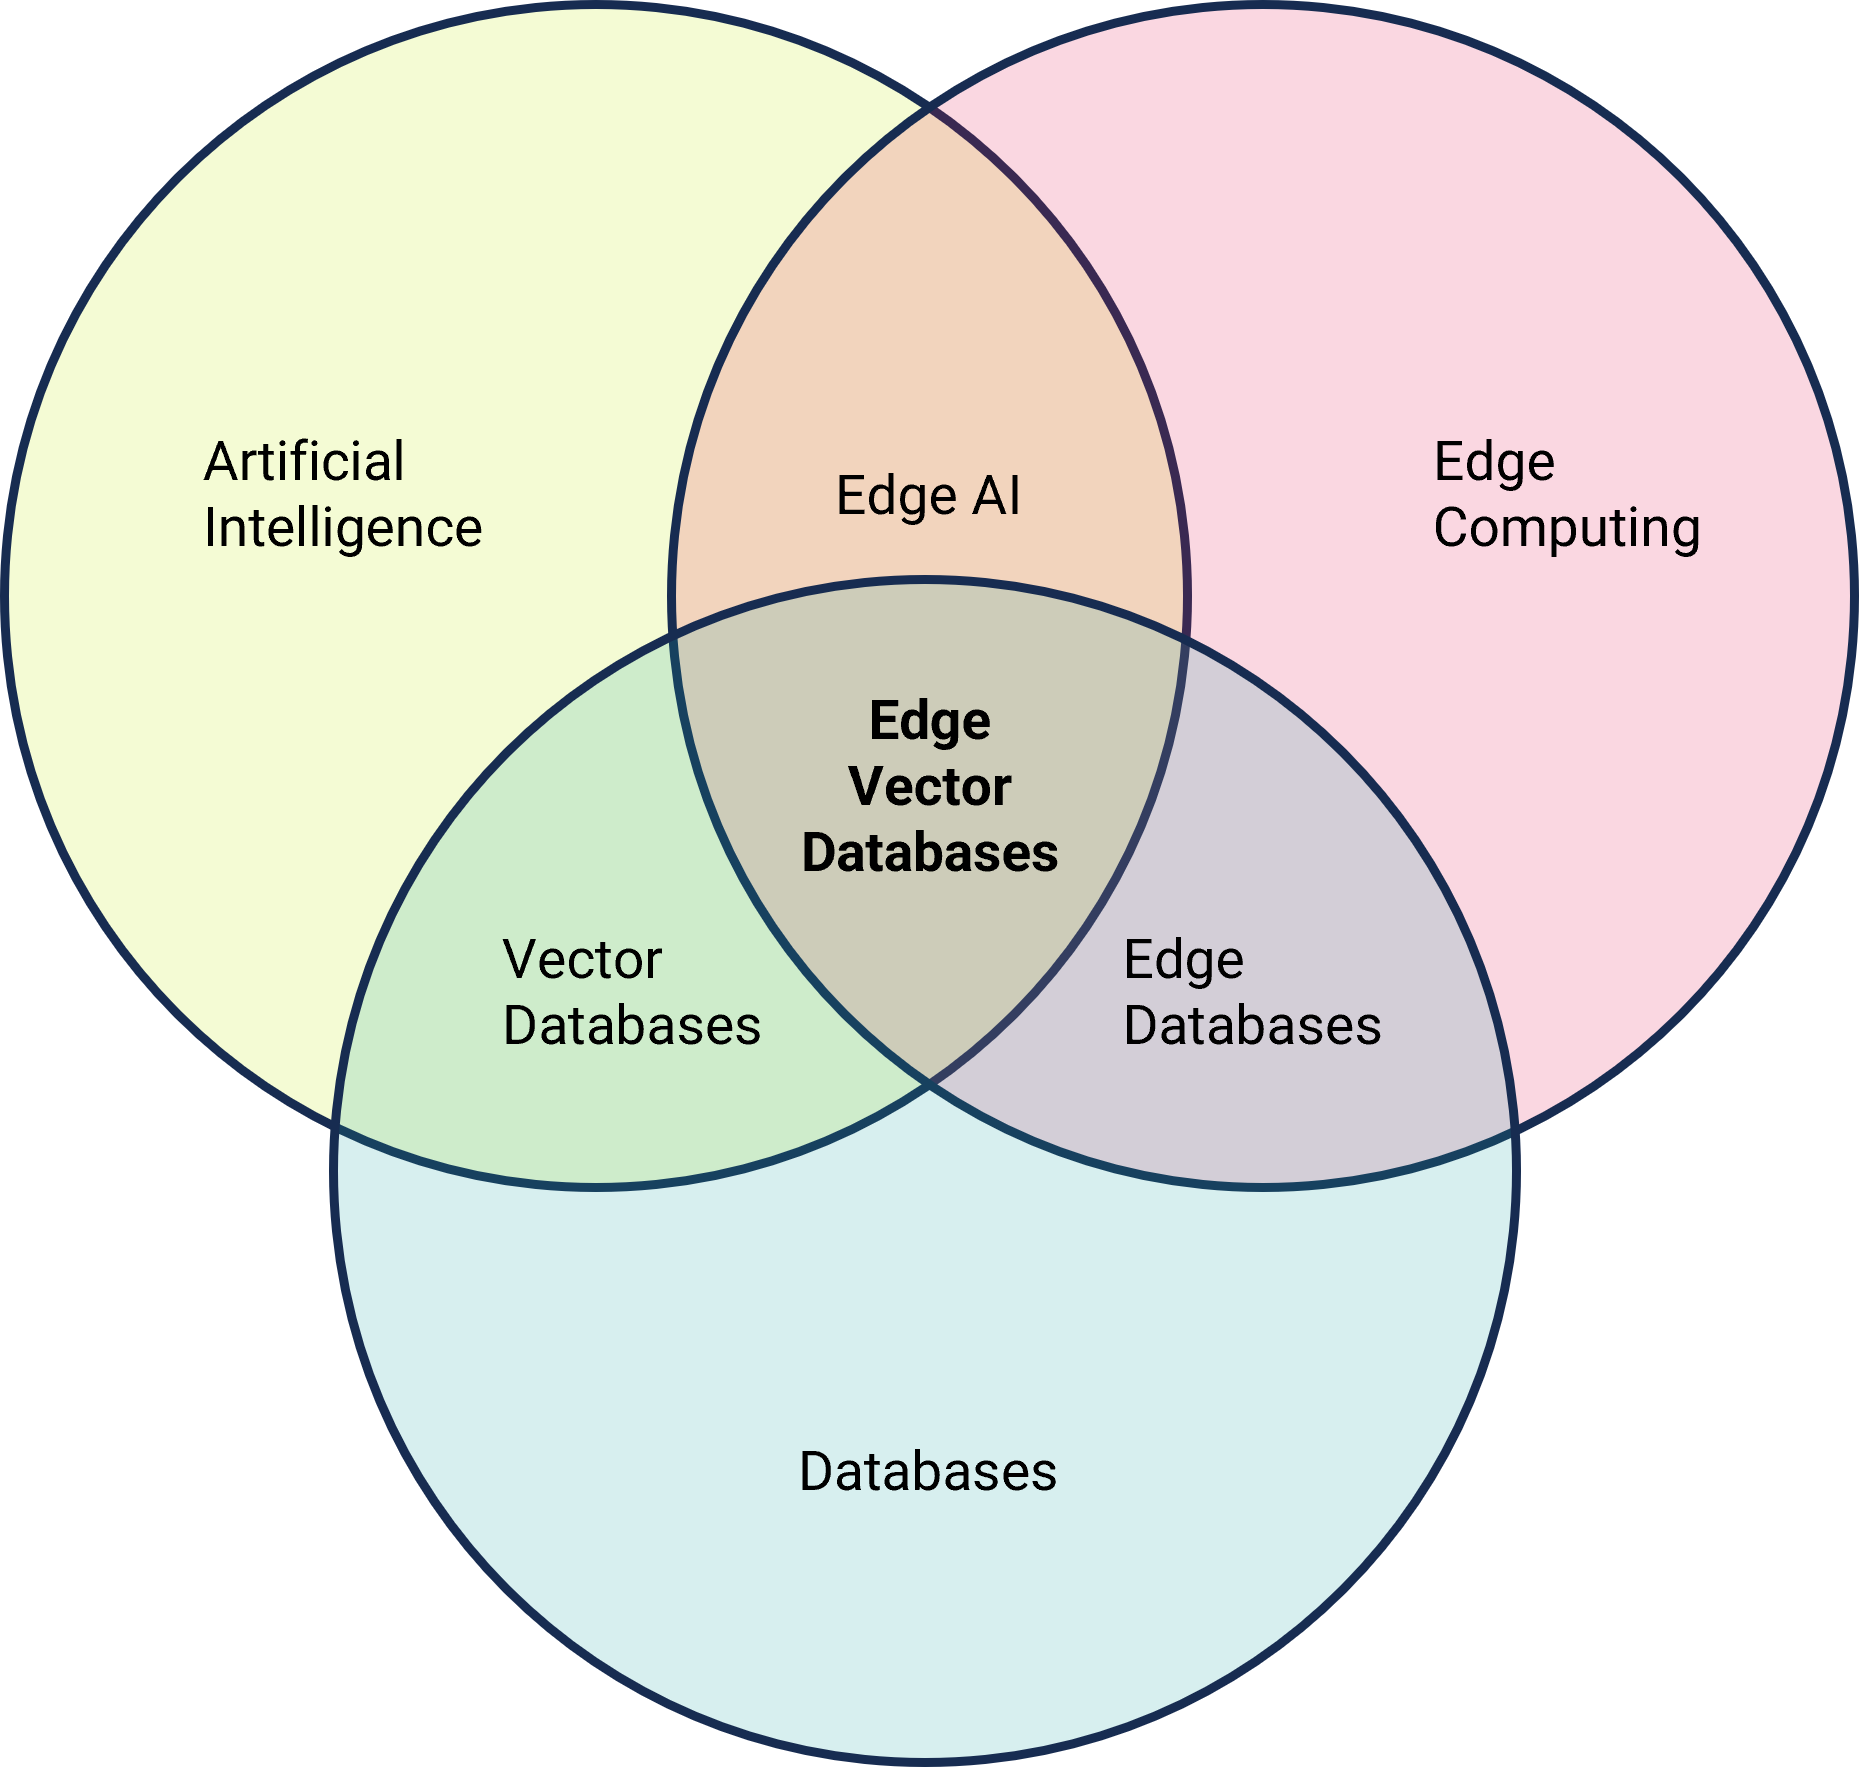 Edge Vector Databases are the basis for Edge AI